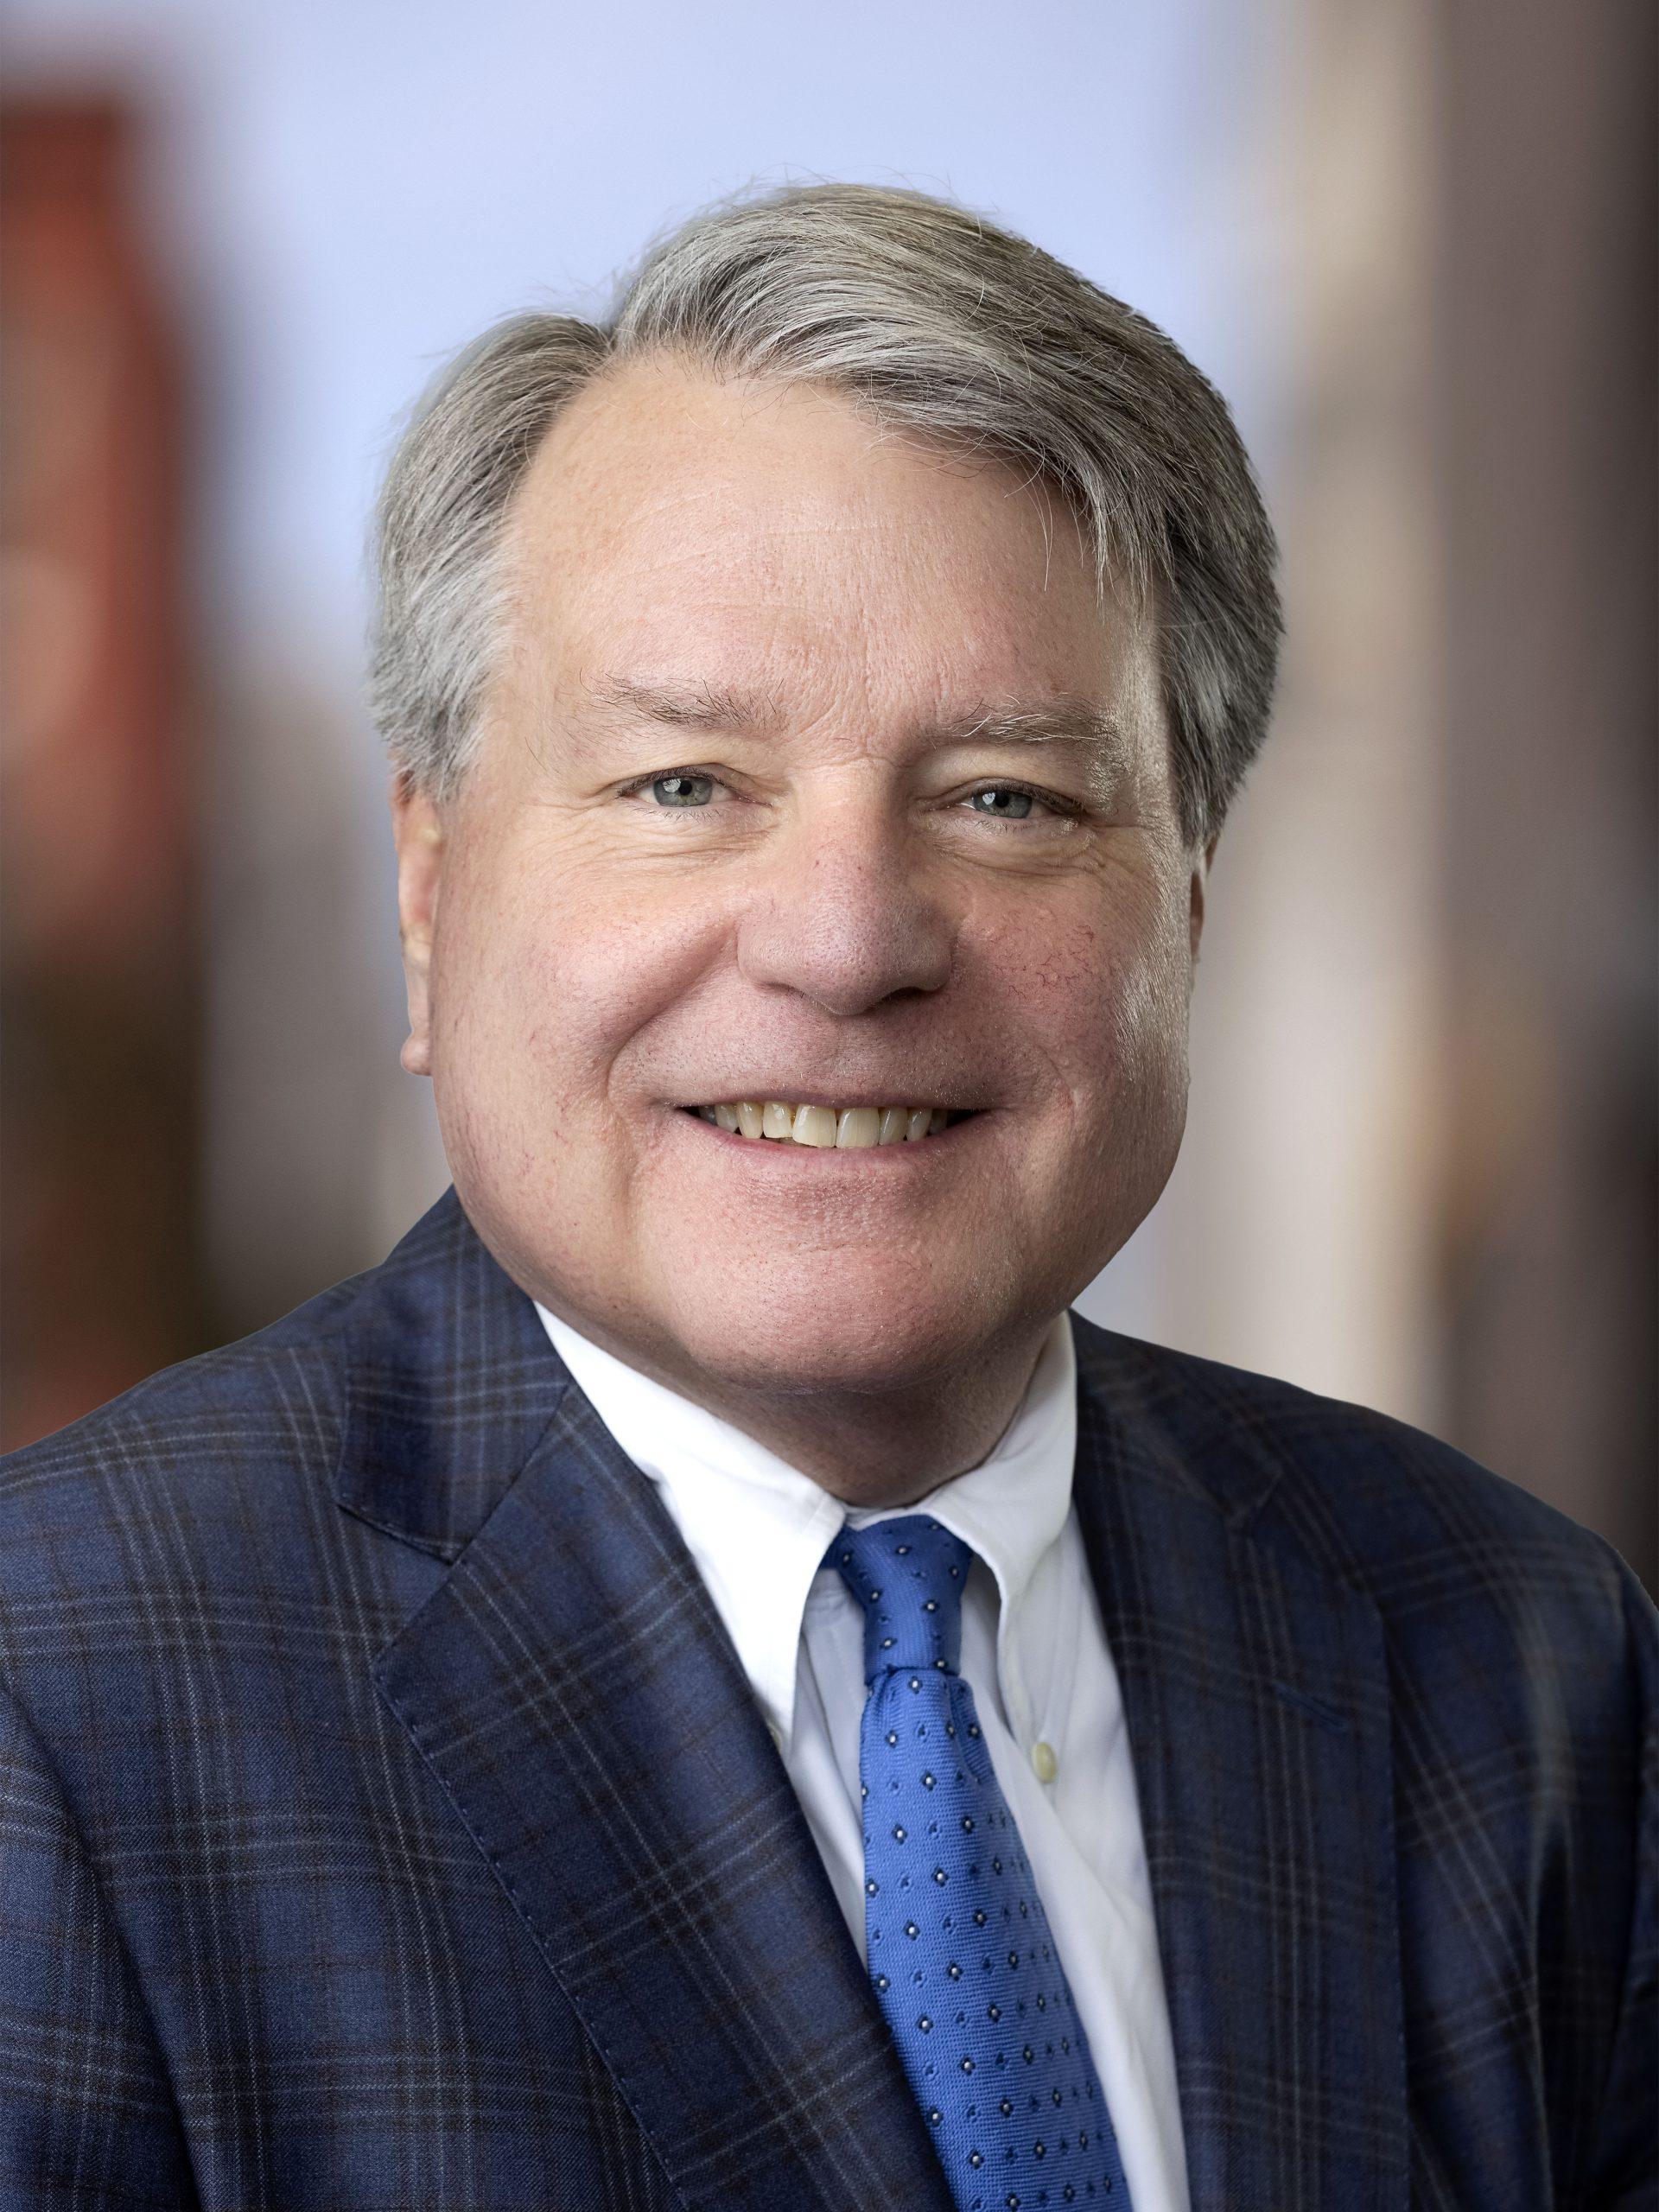 Lawrence (Beau) Hammet is Counsel at Krebs Farley, representing clients in Alabama and Tennessee. His practice areas include complex commercial litigation, construction litigation, directors & officers, subcontractor default insurance, surety law and insurance coverage.